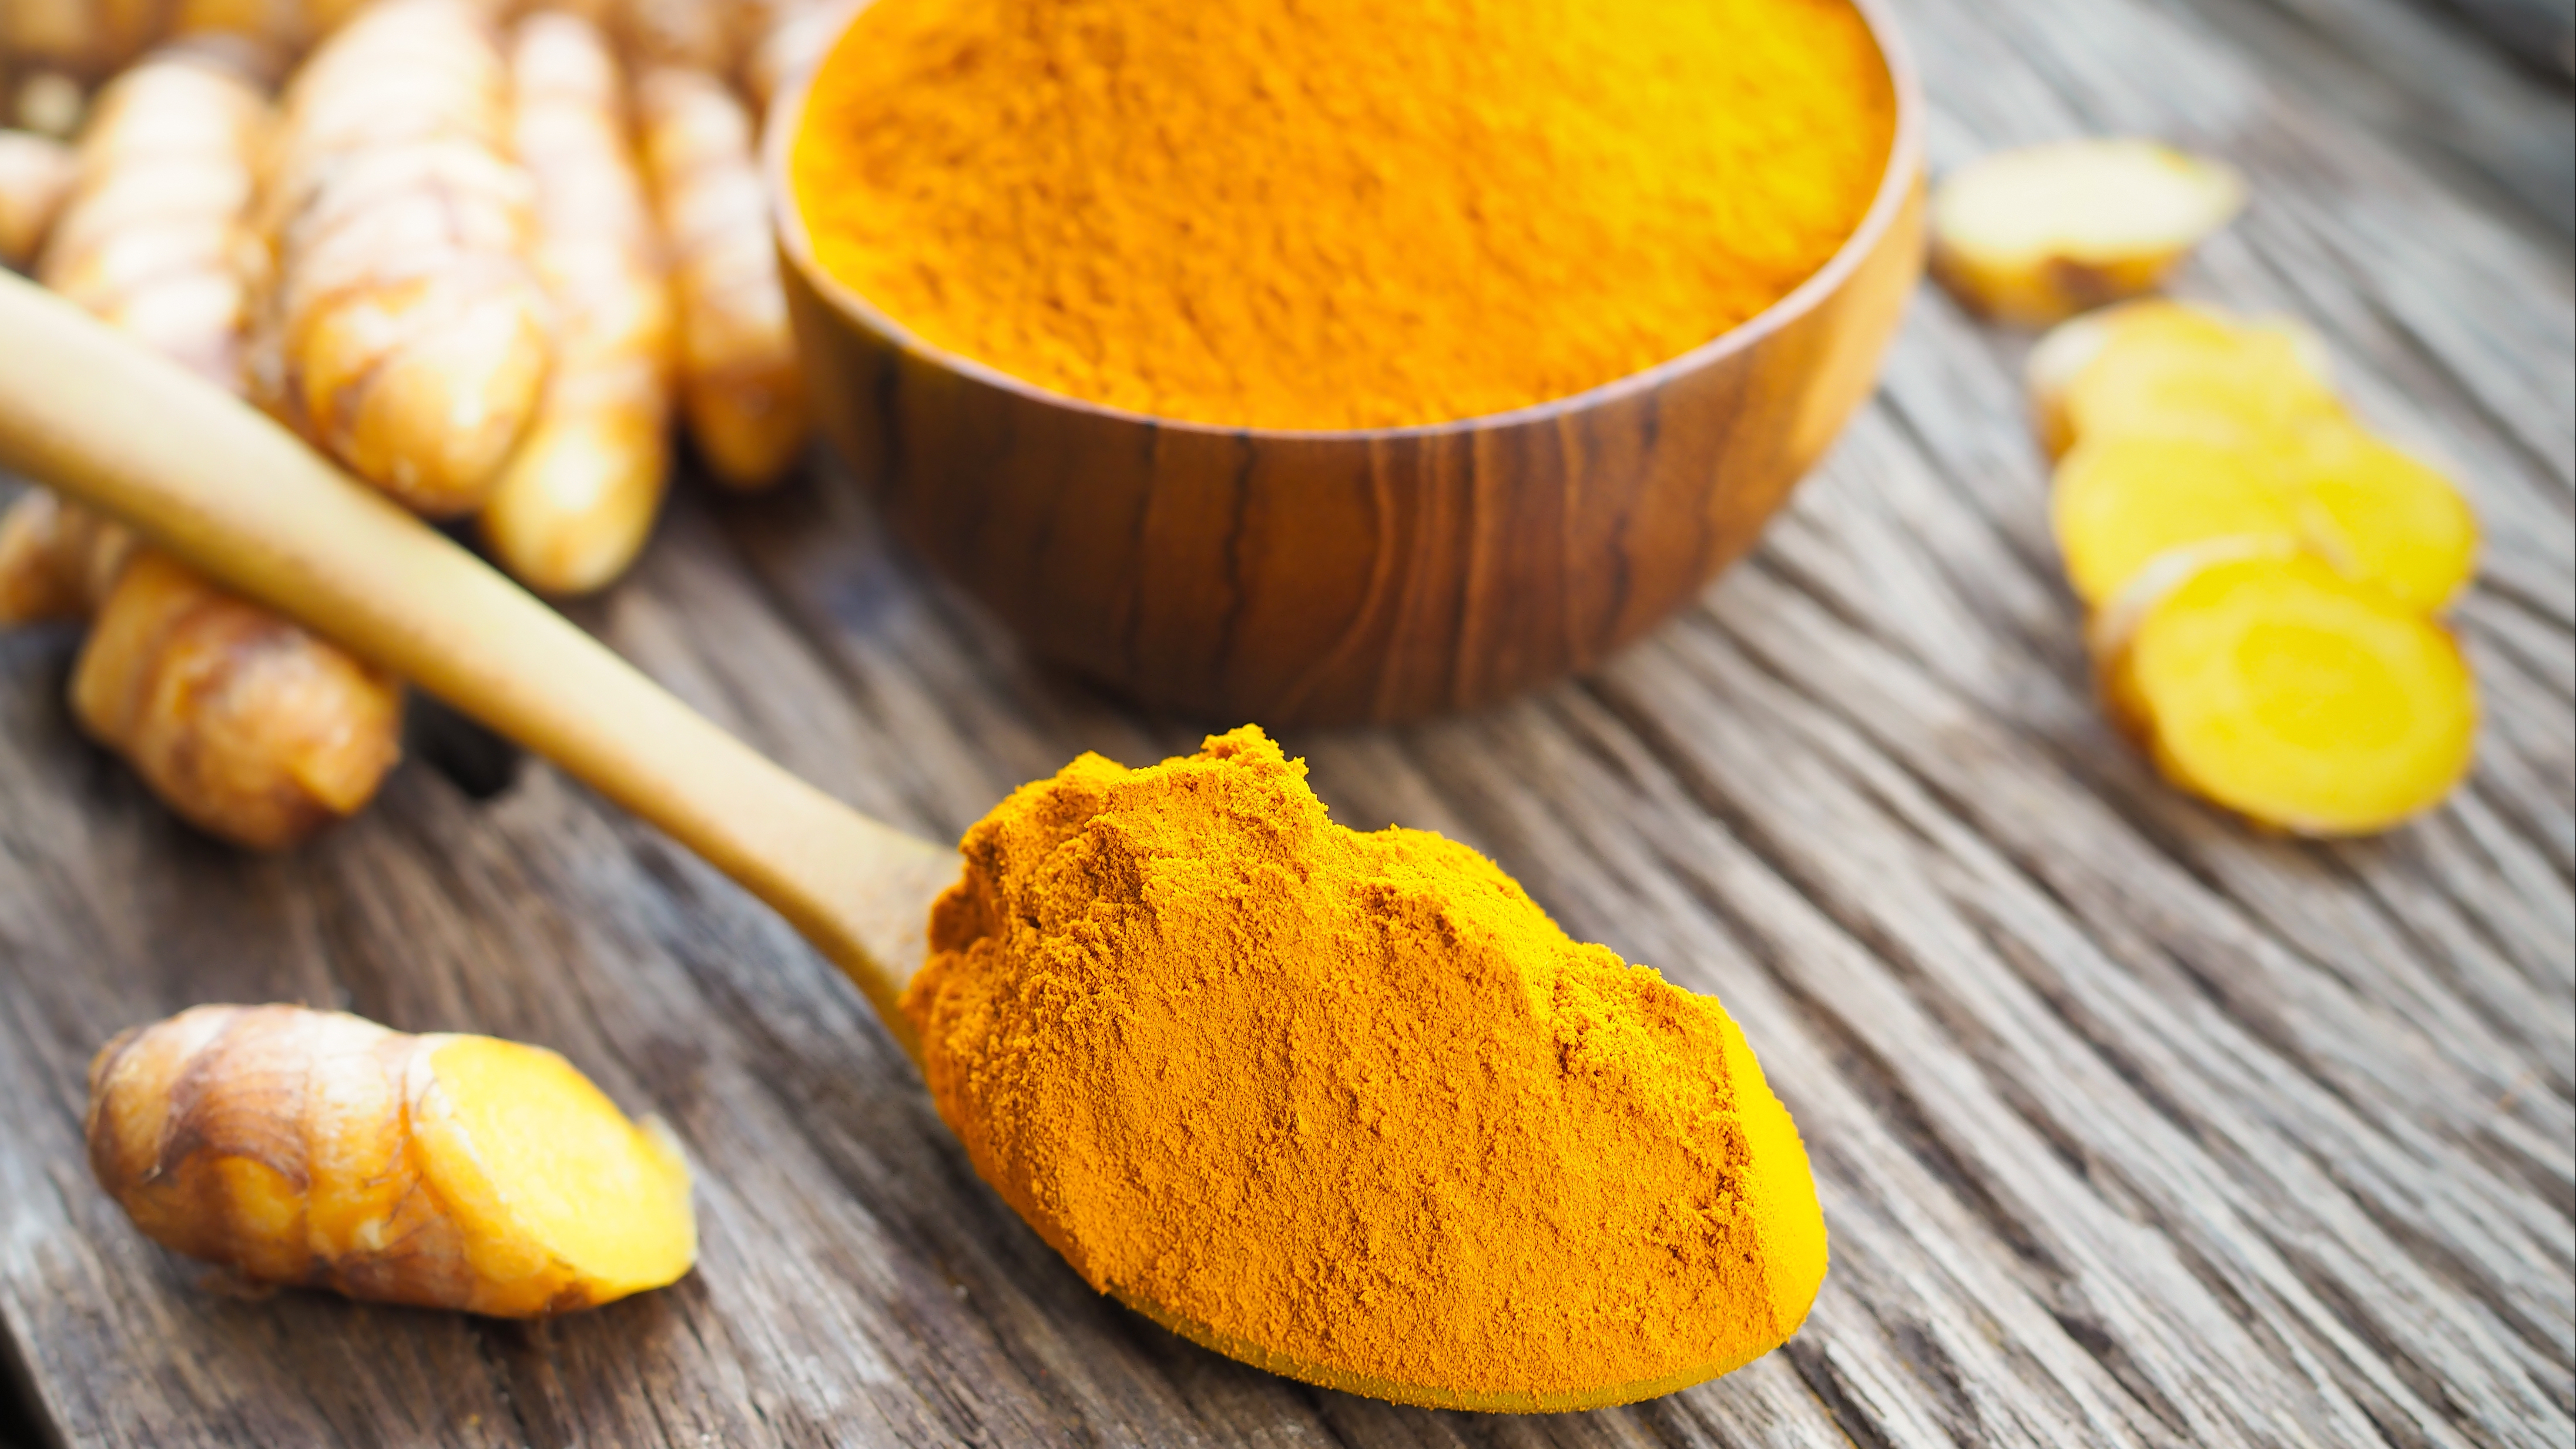 Turmeric powder in wooden spoon on old wooden table.